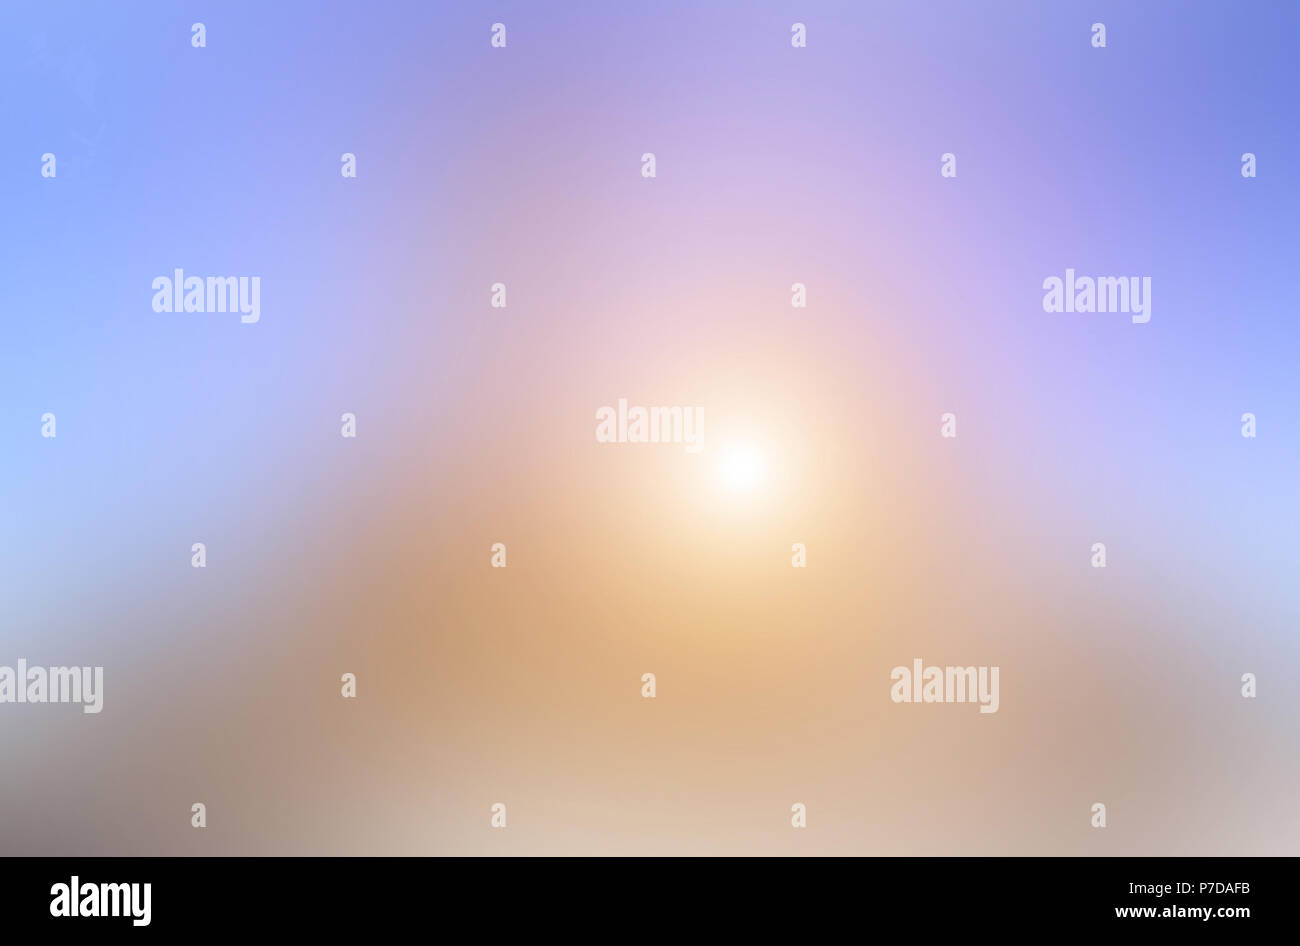 Abstract Blurred purple and yellow gradient background, for your mockup and template design. Stock Photo